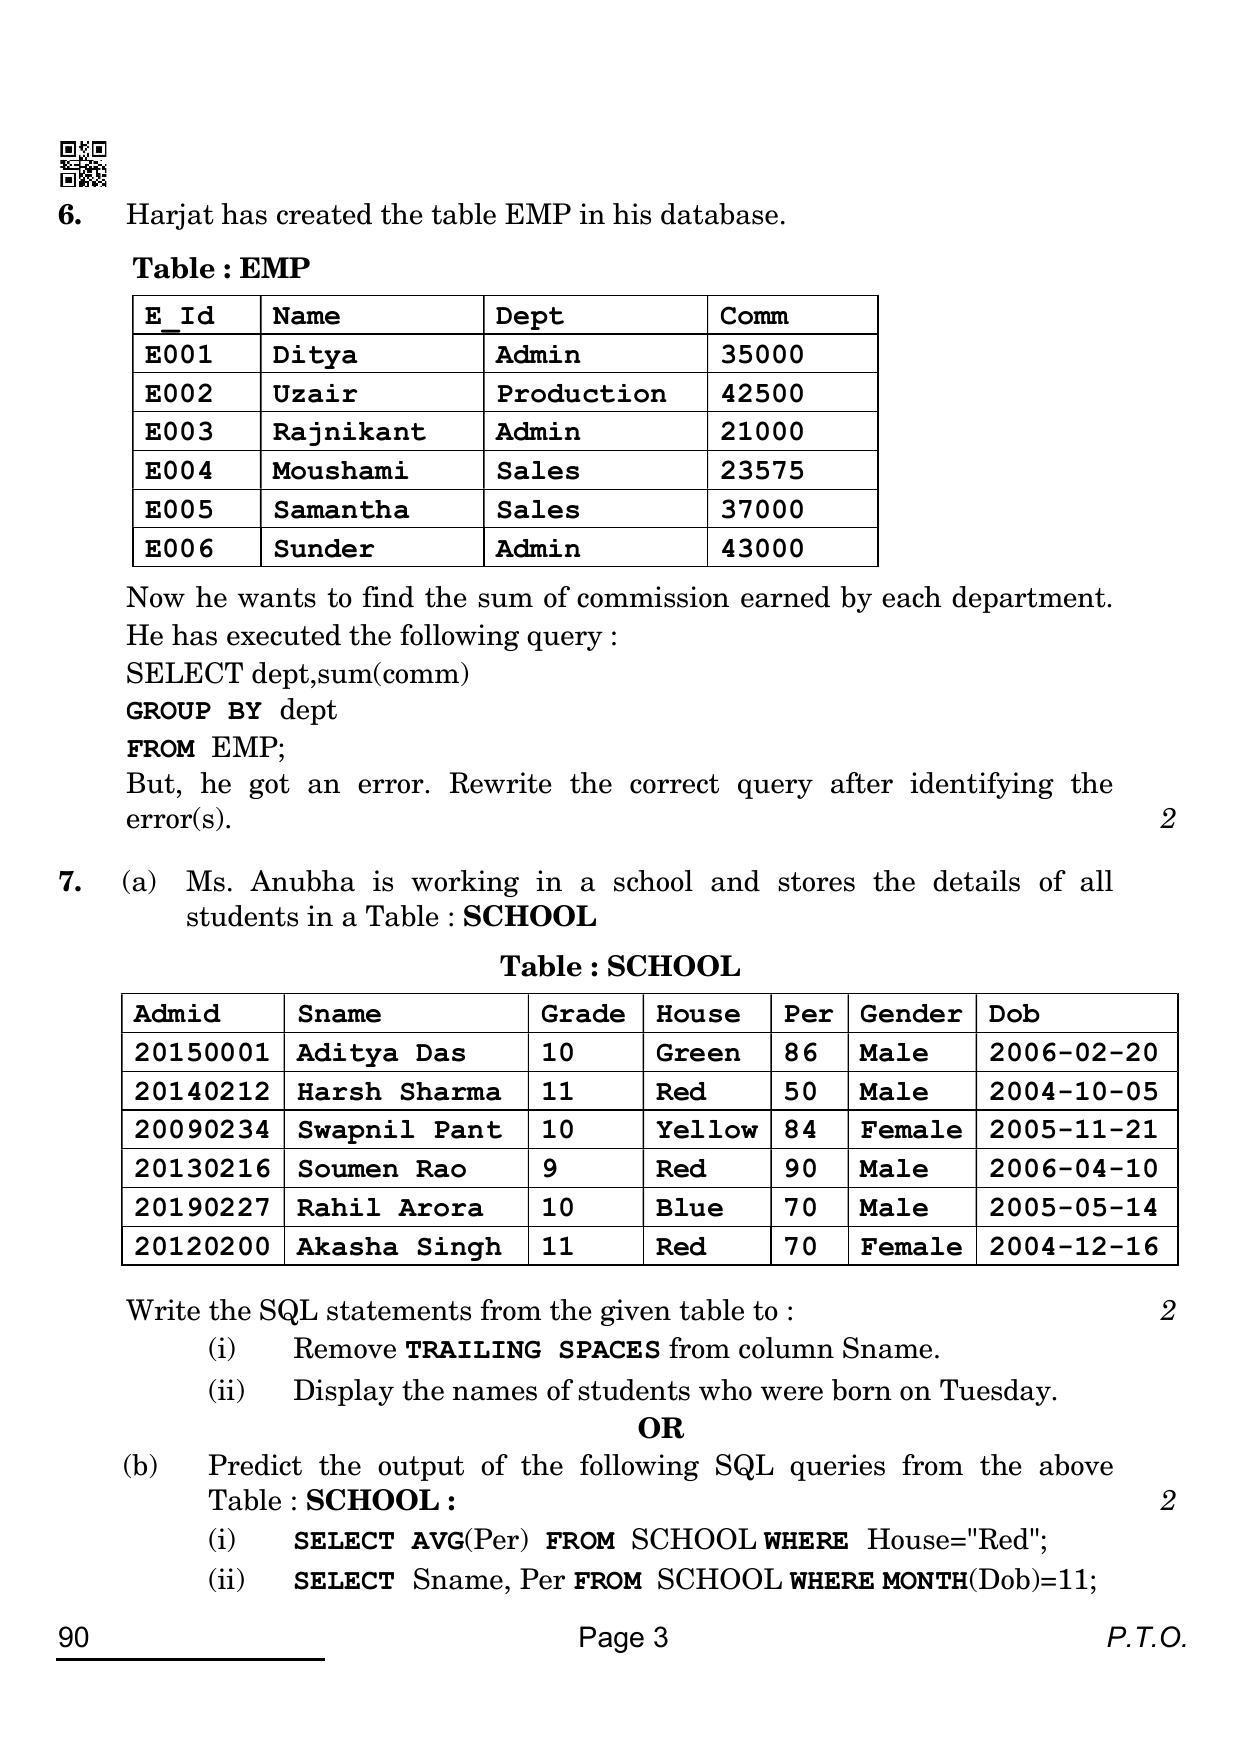 CBSE Class 12 90 INFORMATIC PRACTICES 2022 Compartment Question Paper - Page 3